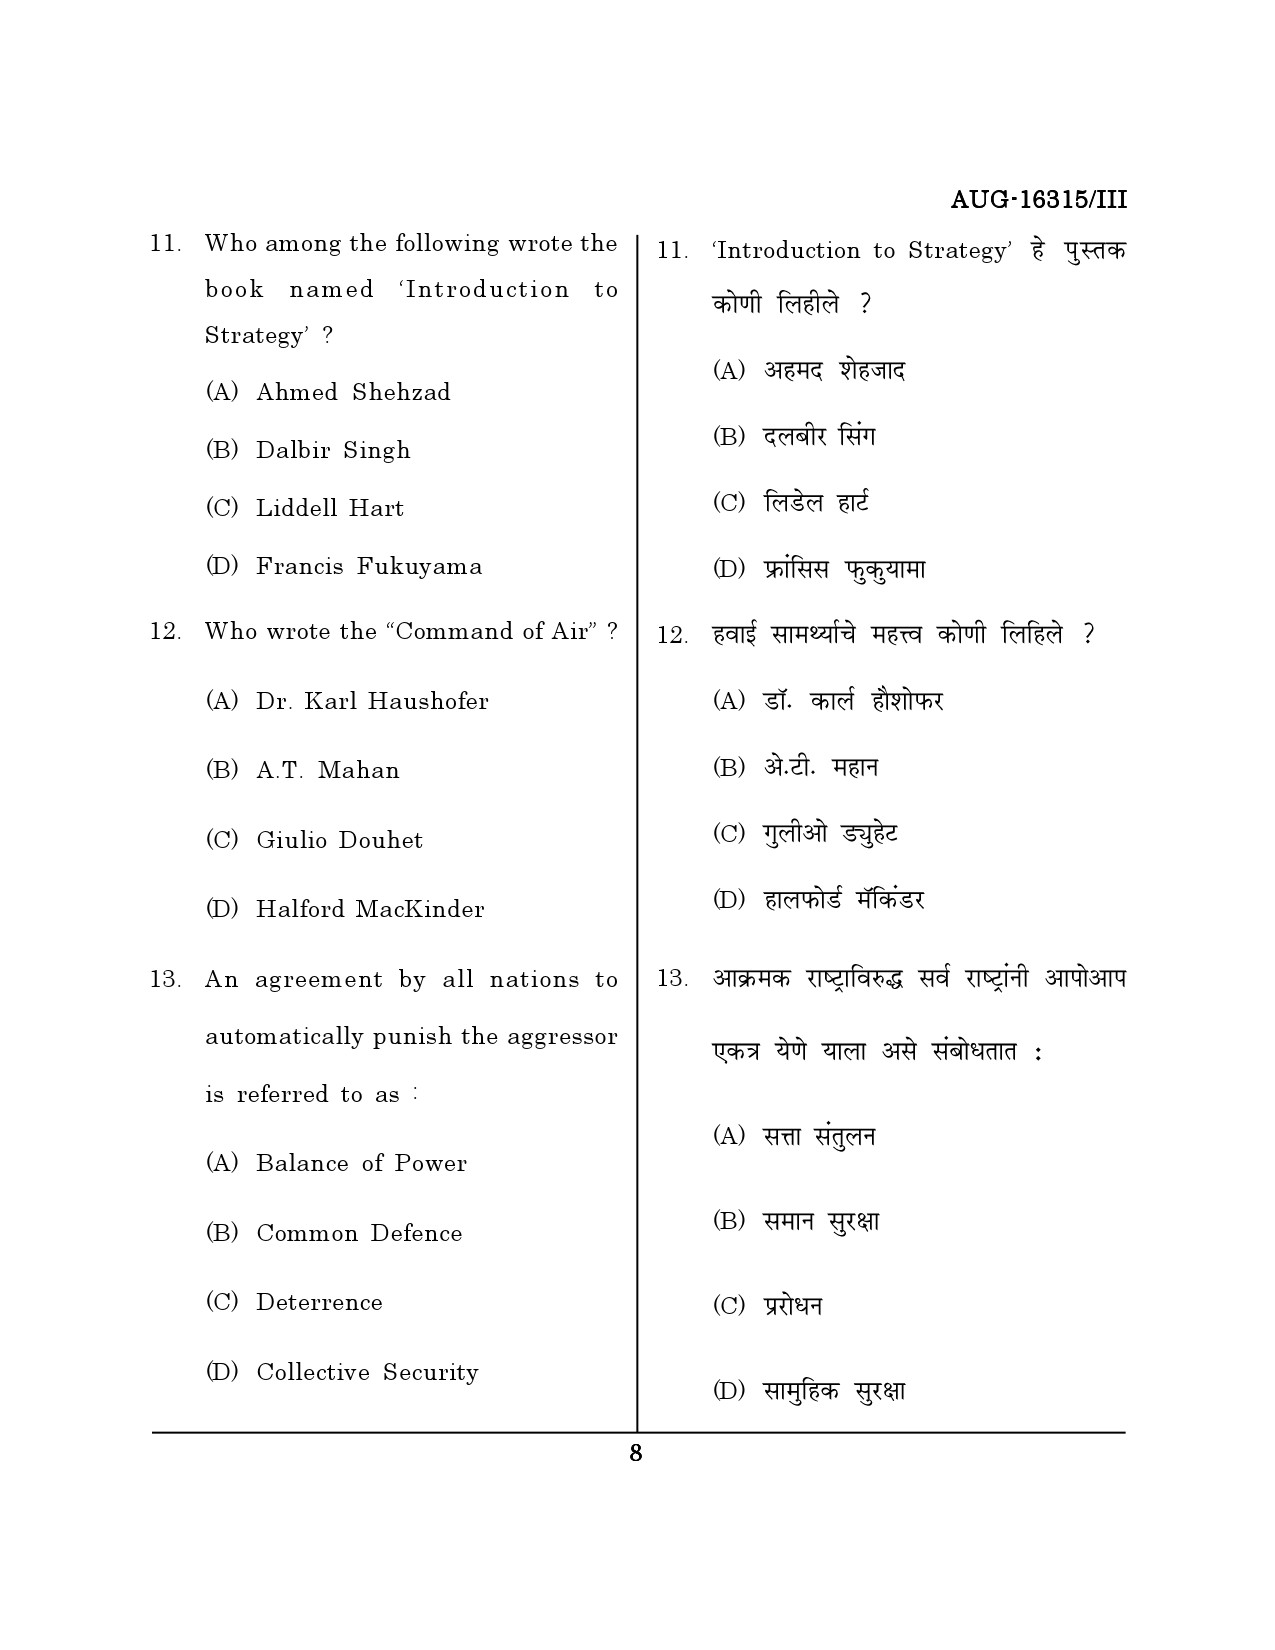 Maharashtra SET Defence and Strategic Studies Question Paper III August 2015 7